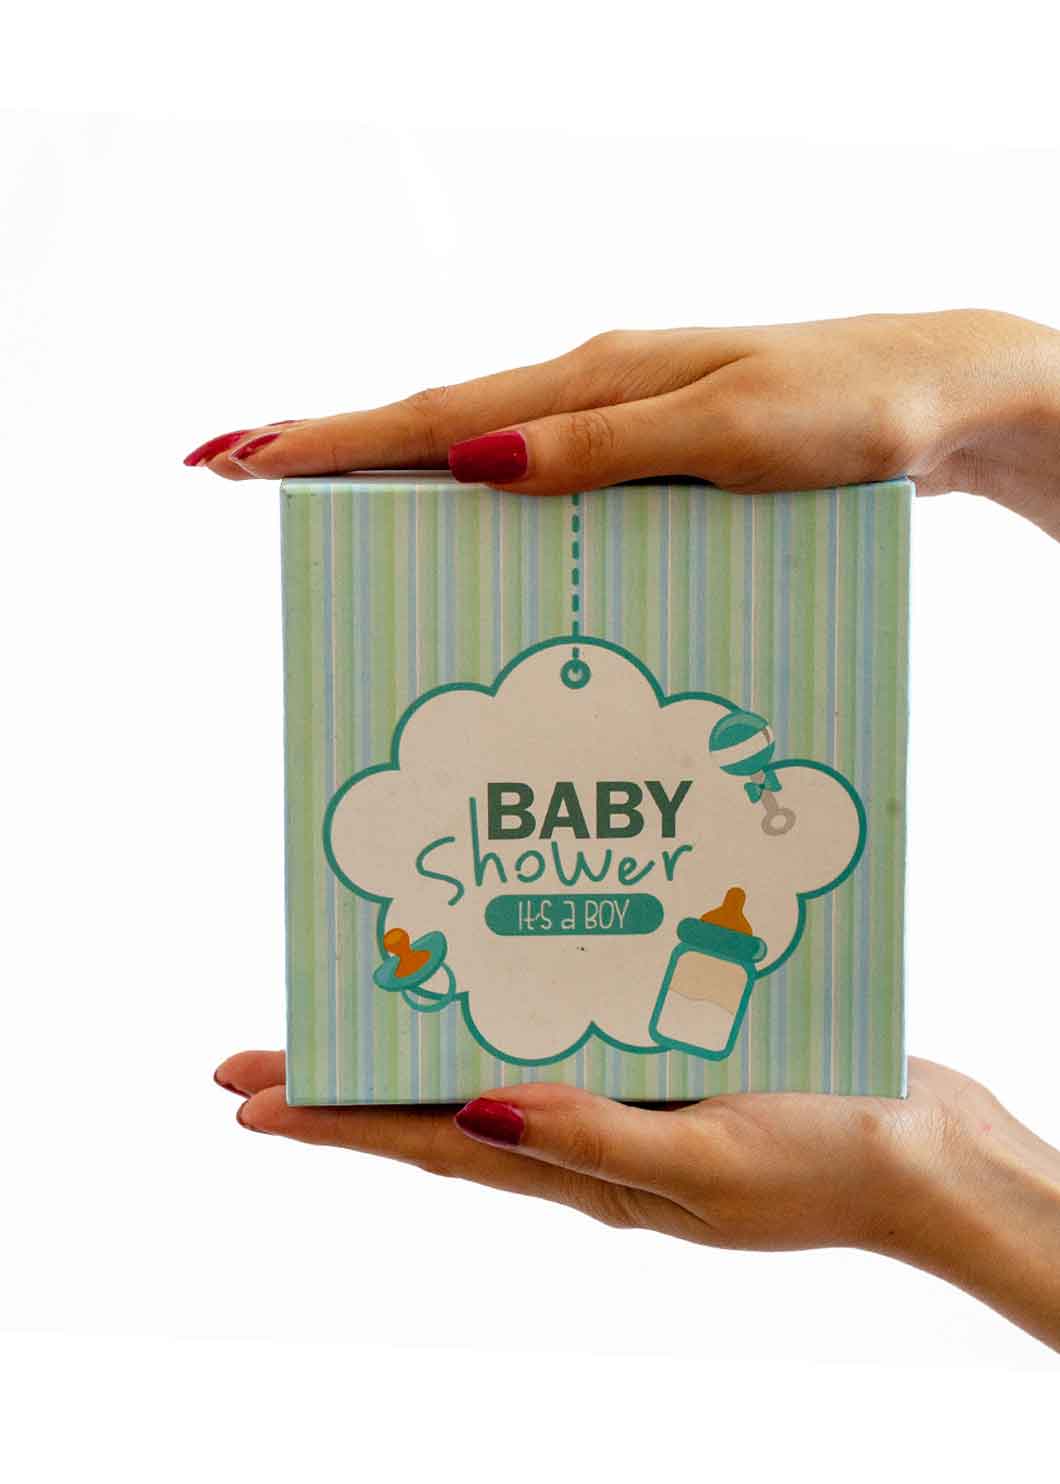 Baby Shower Box for Packing - Sweet Box - Baby Shower Printed